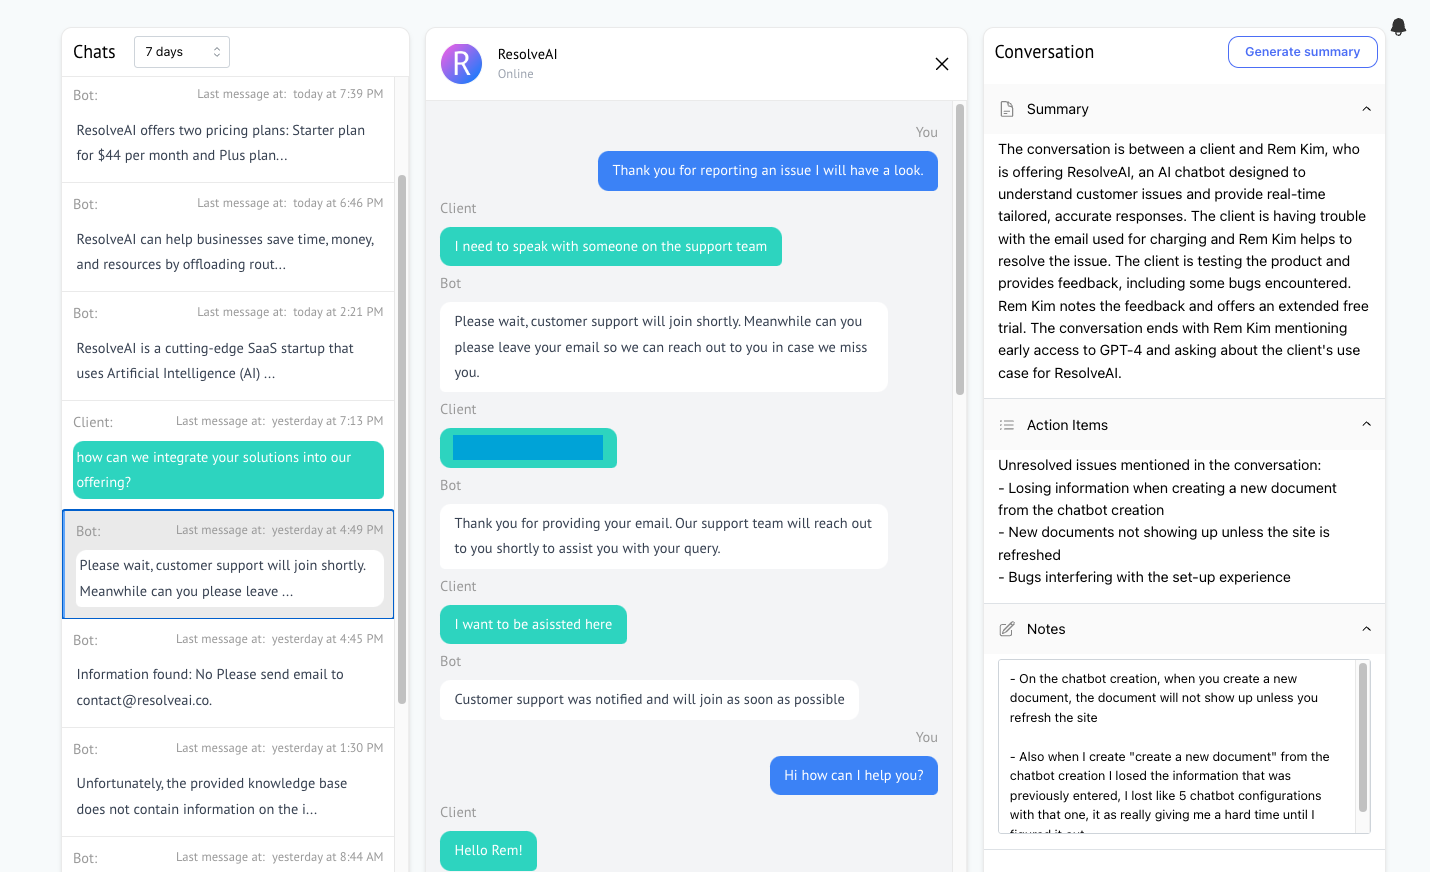 Review and join conversations. Utilize conversations summary, so you don't need to review full transcript and actions items to outline exact problems customer is trying to solve.